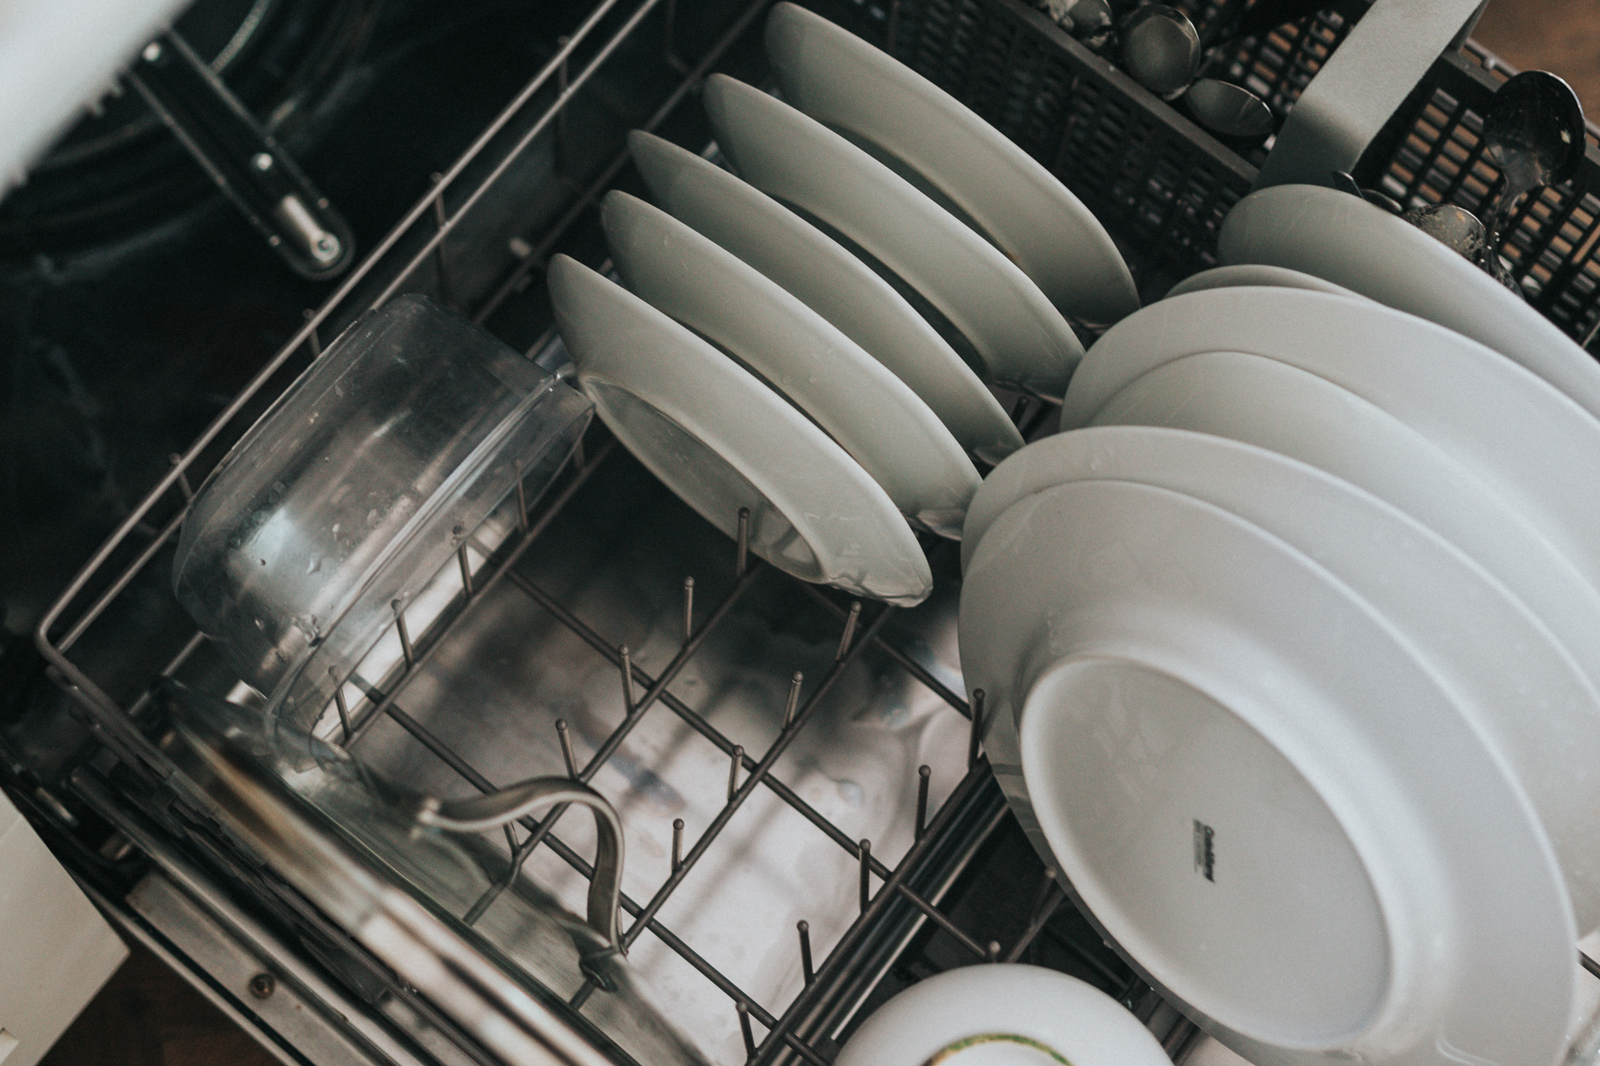 Dishwasher Salt Dispenser Not Working, Why and How to Fix It - Homeforce